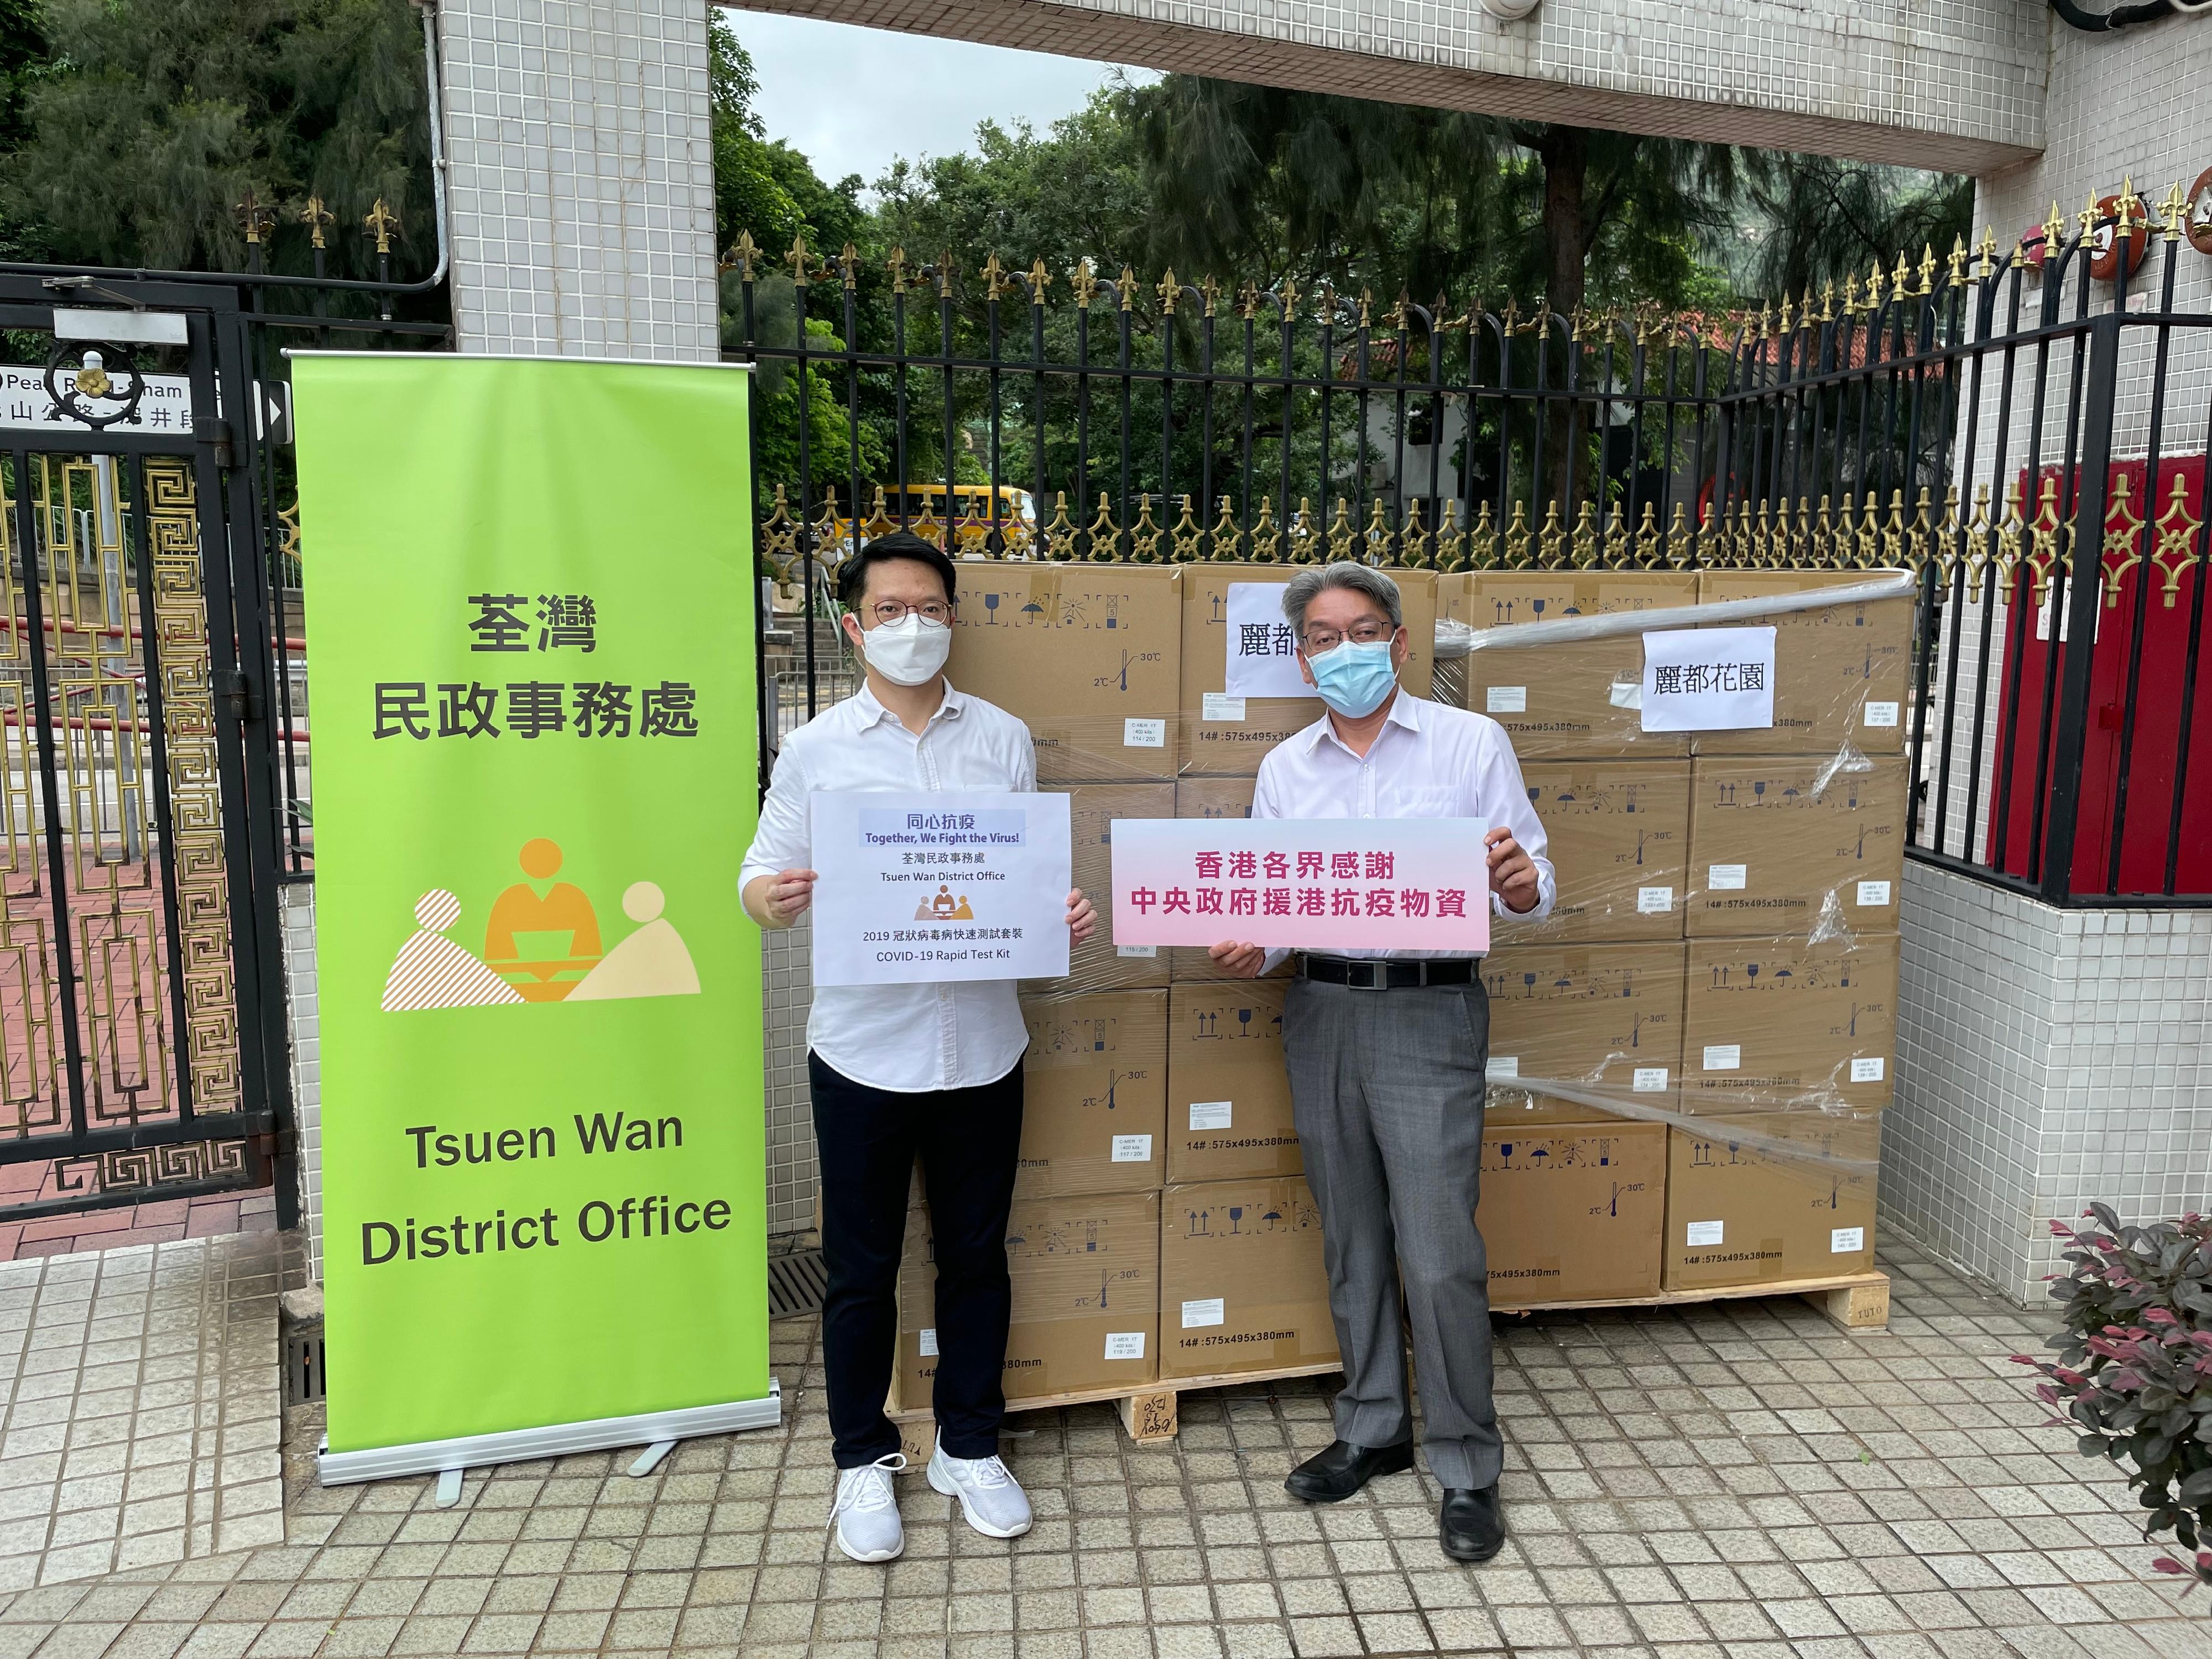 The Tsuen Wan District Office today (June 2) distributed COVID-19 rapid test kits to households, cleansing workers and property management staff living and working in Lido Garden for voluntary testing through the property management company.